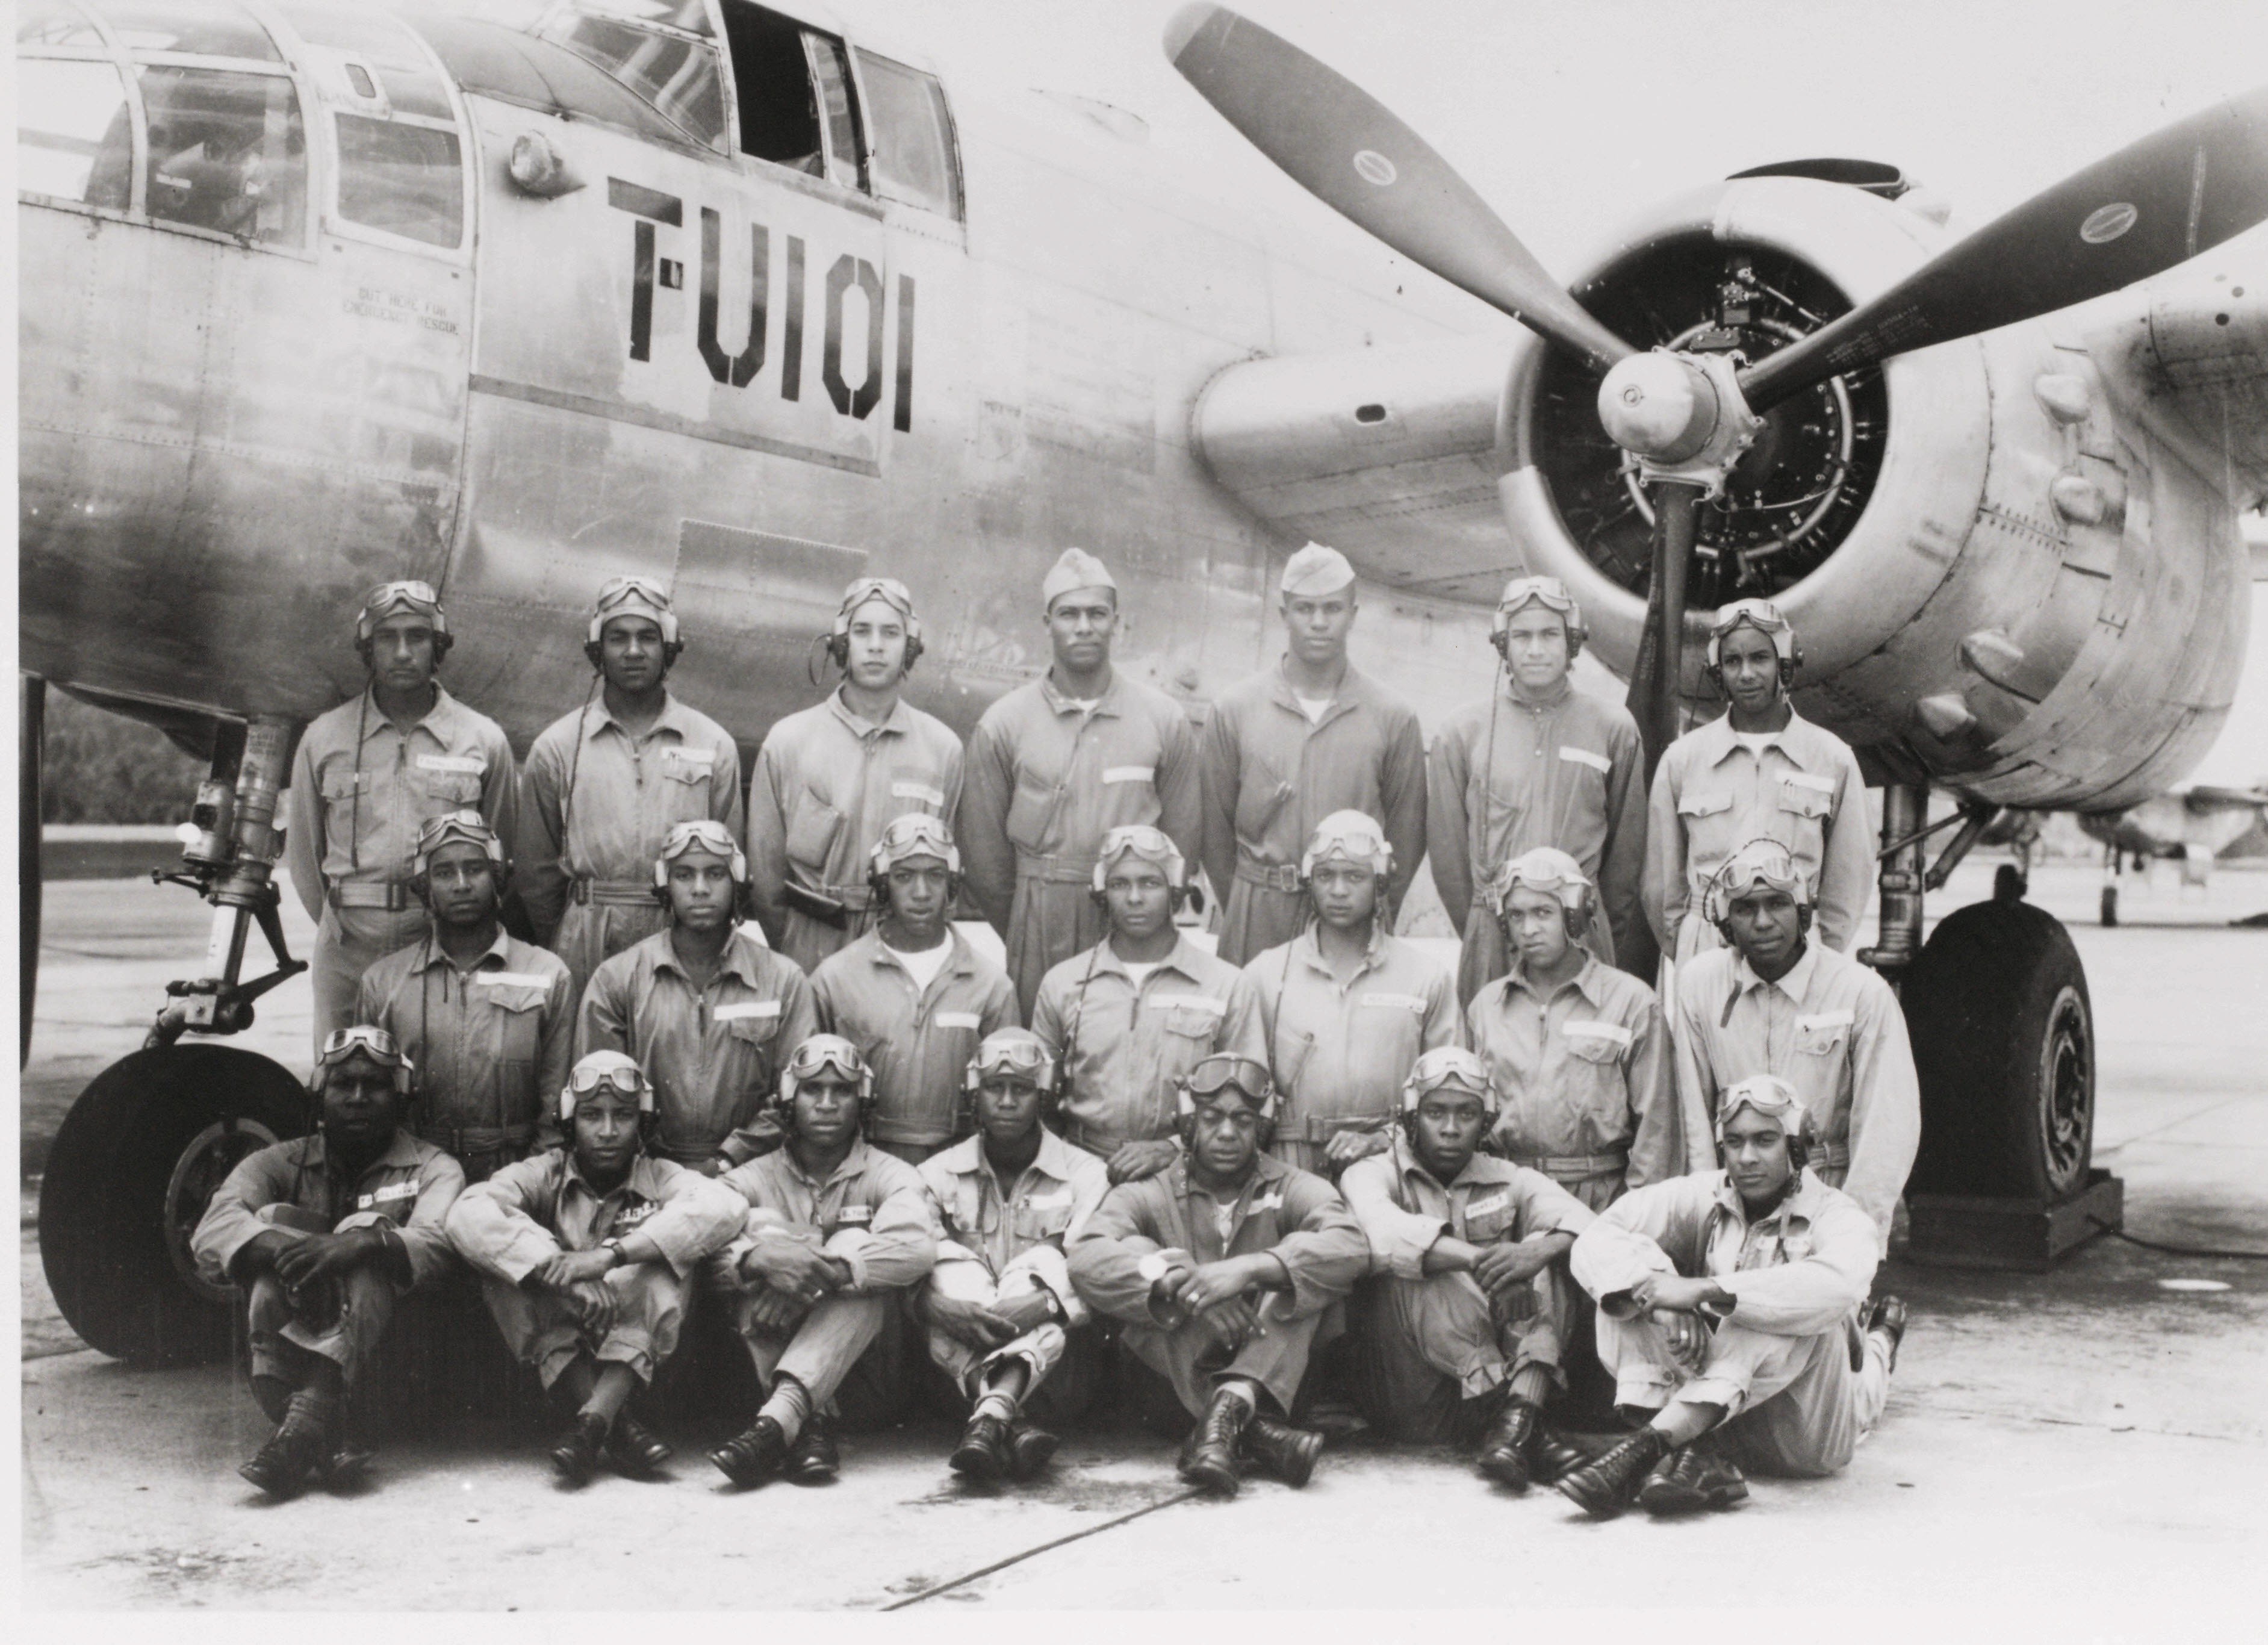 The 477th Bombardment Group